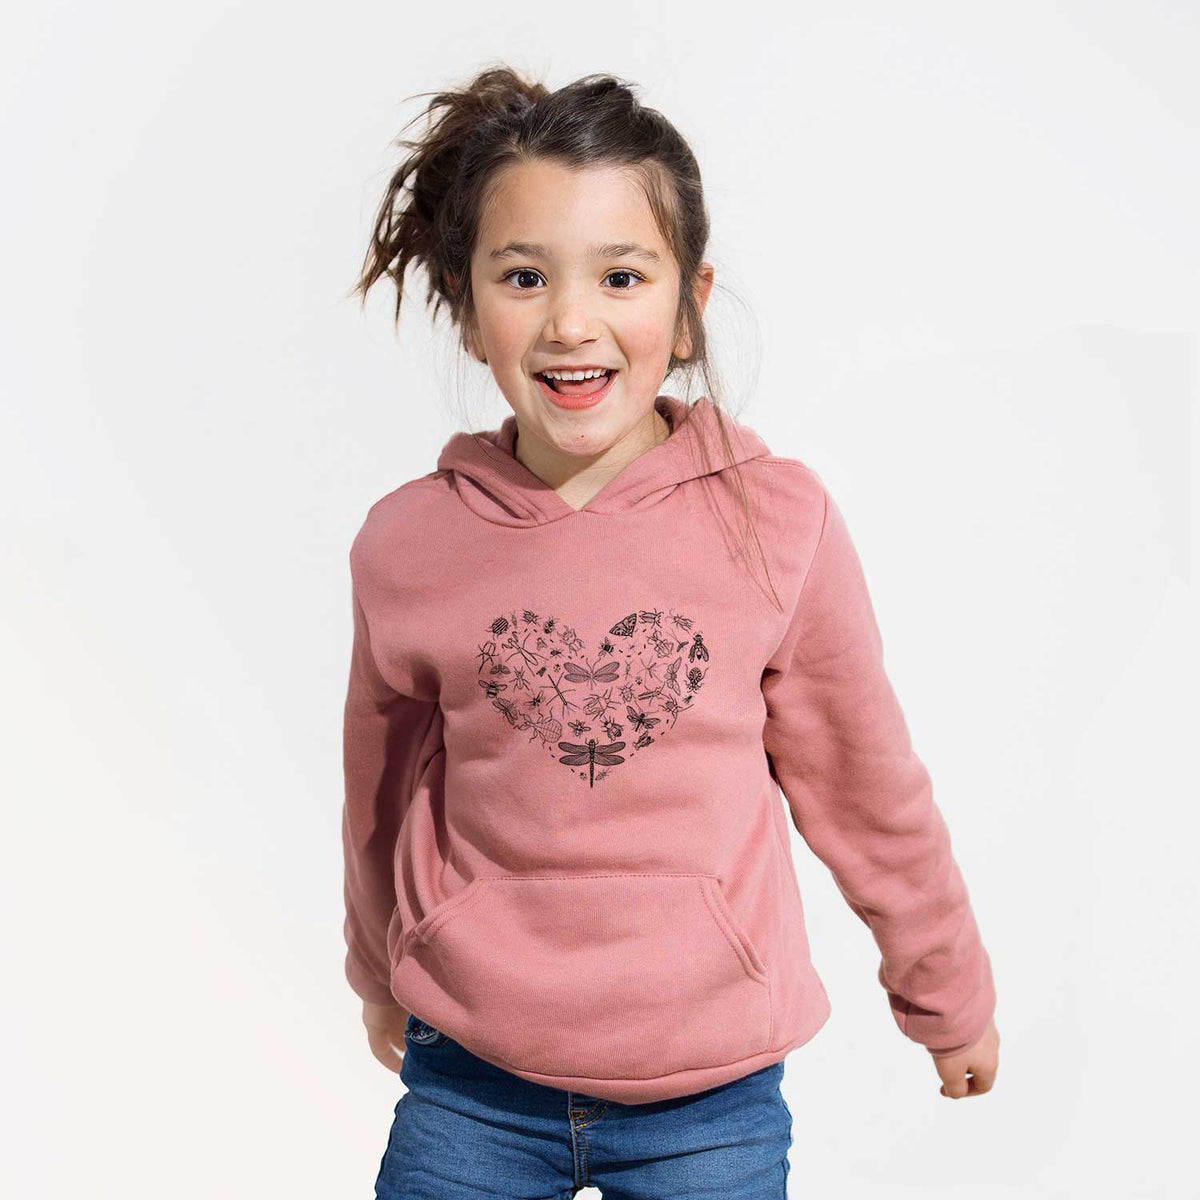 Heart Full of Insects - Youth Hoodie Sweatshirt